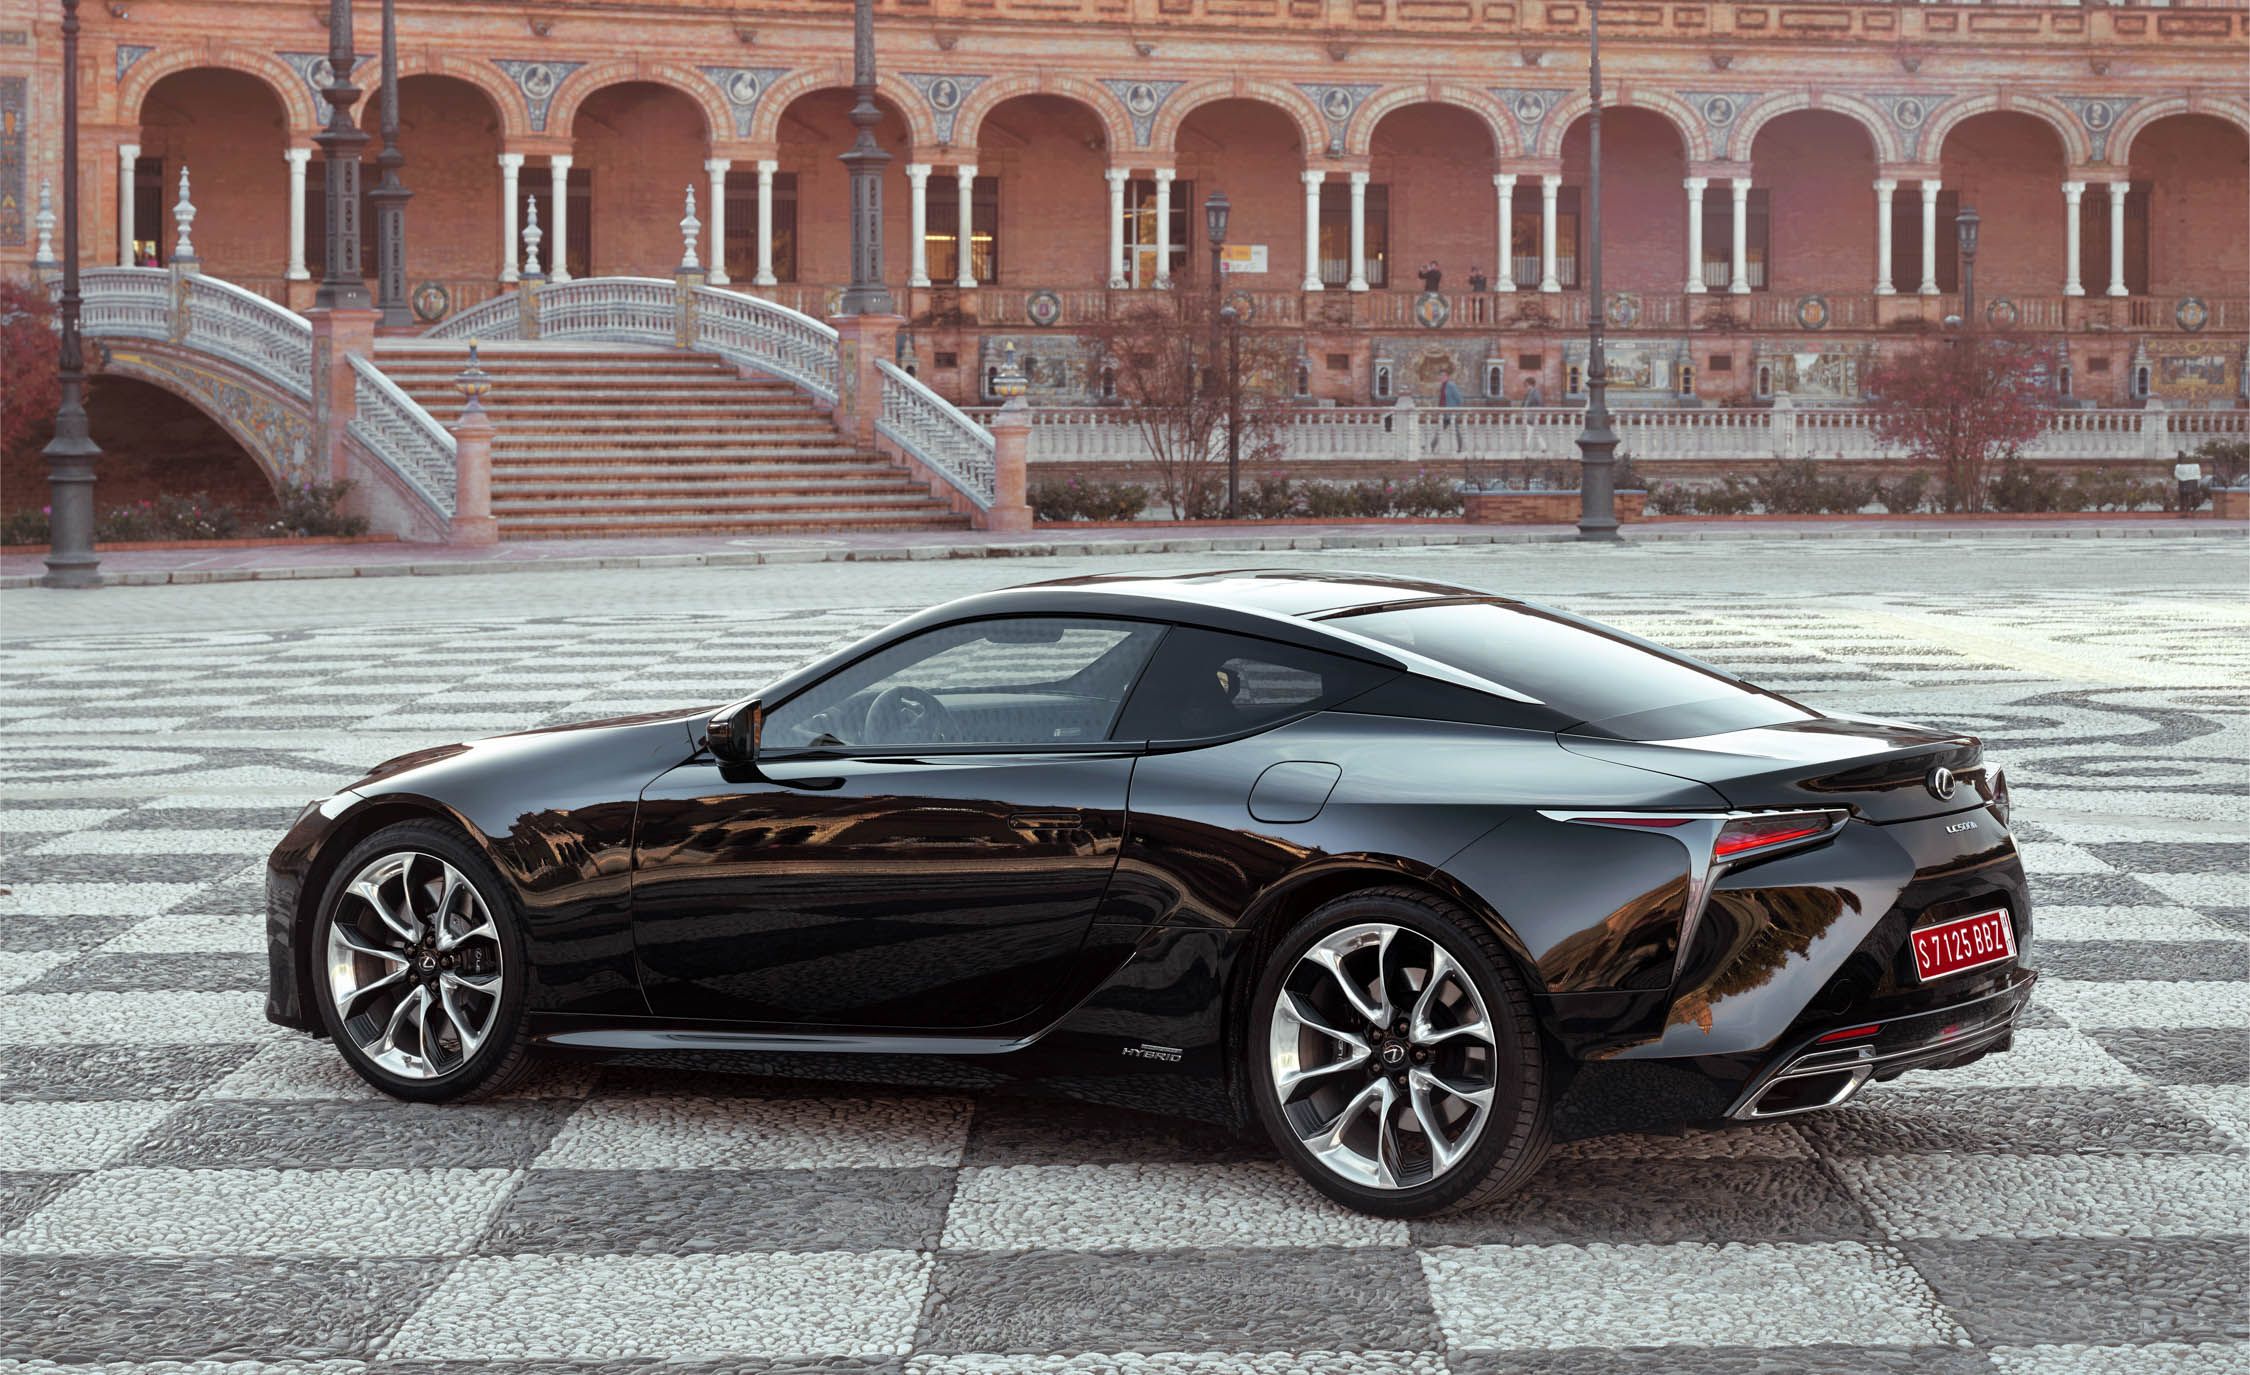 2018 Lexus Lc 500h Black Exterior Side And Rear (View 55 of 84)